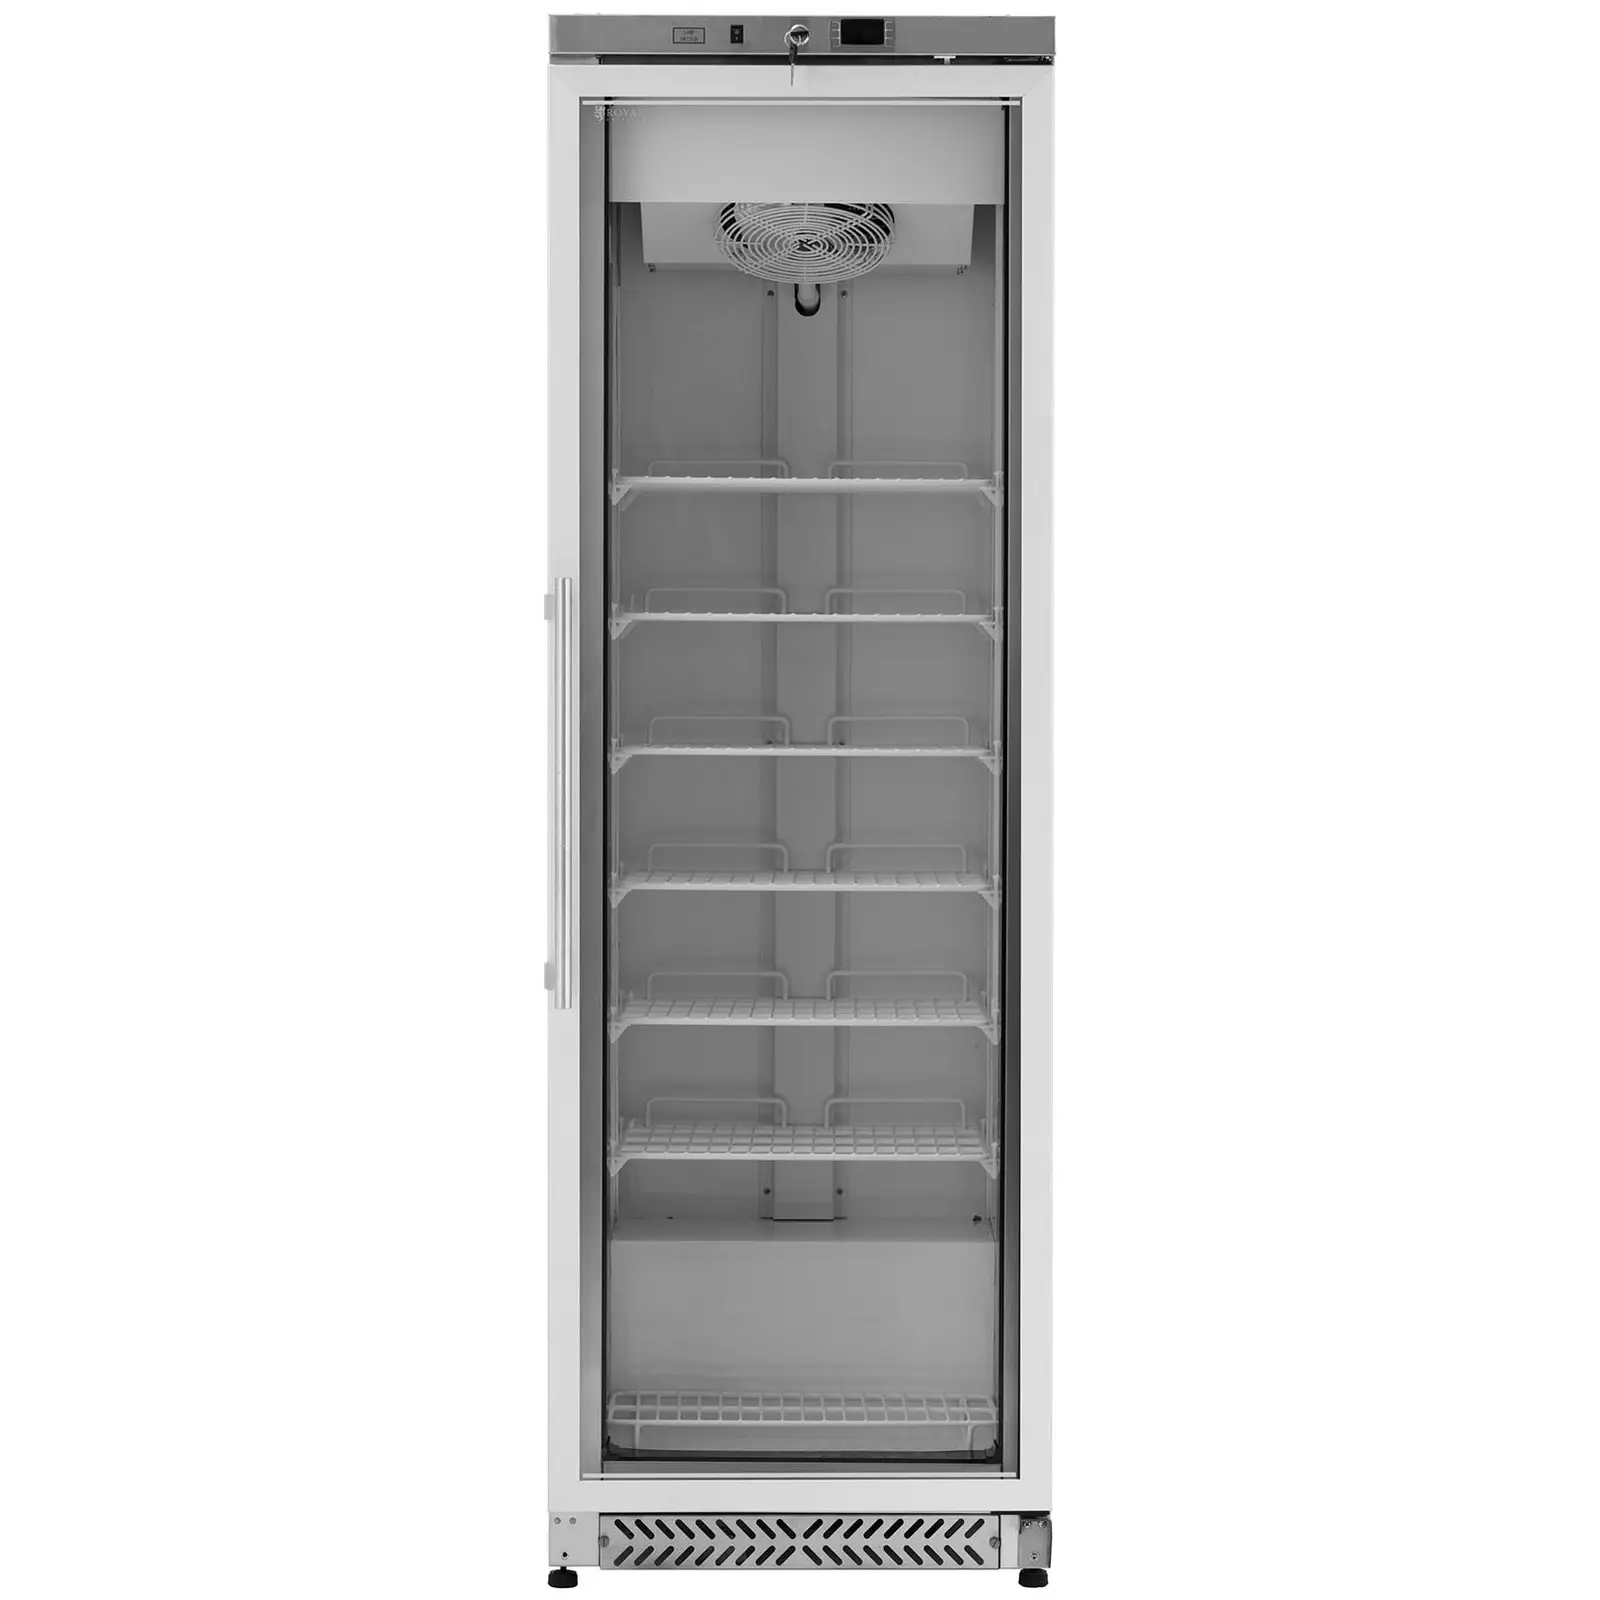 Factory second Freezer - 380 L - Royal Catering - glass door - Silver - refrigerant R290